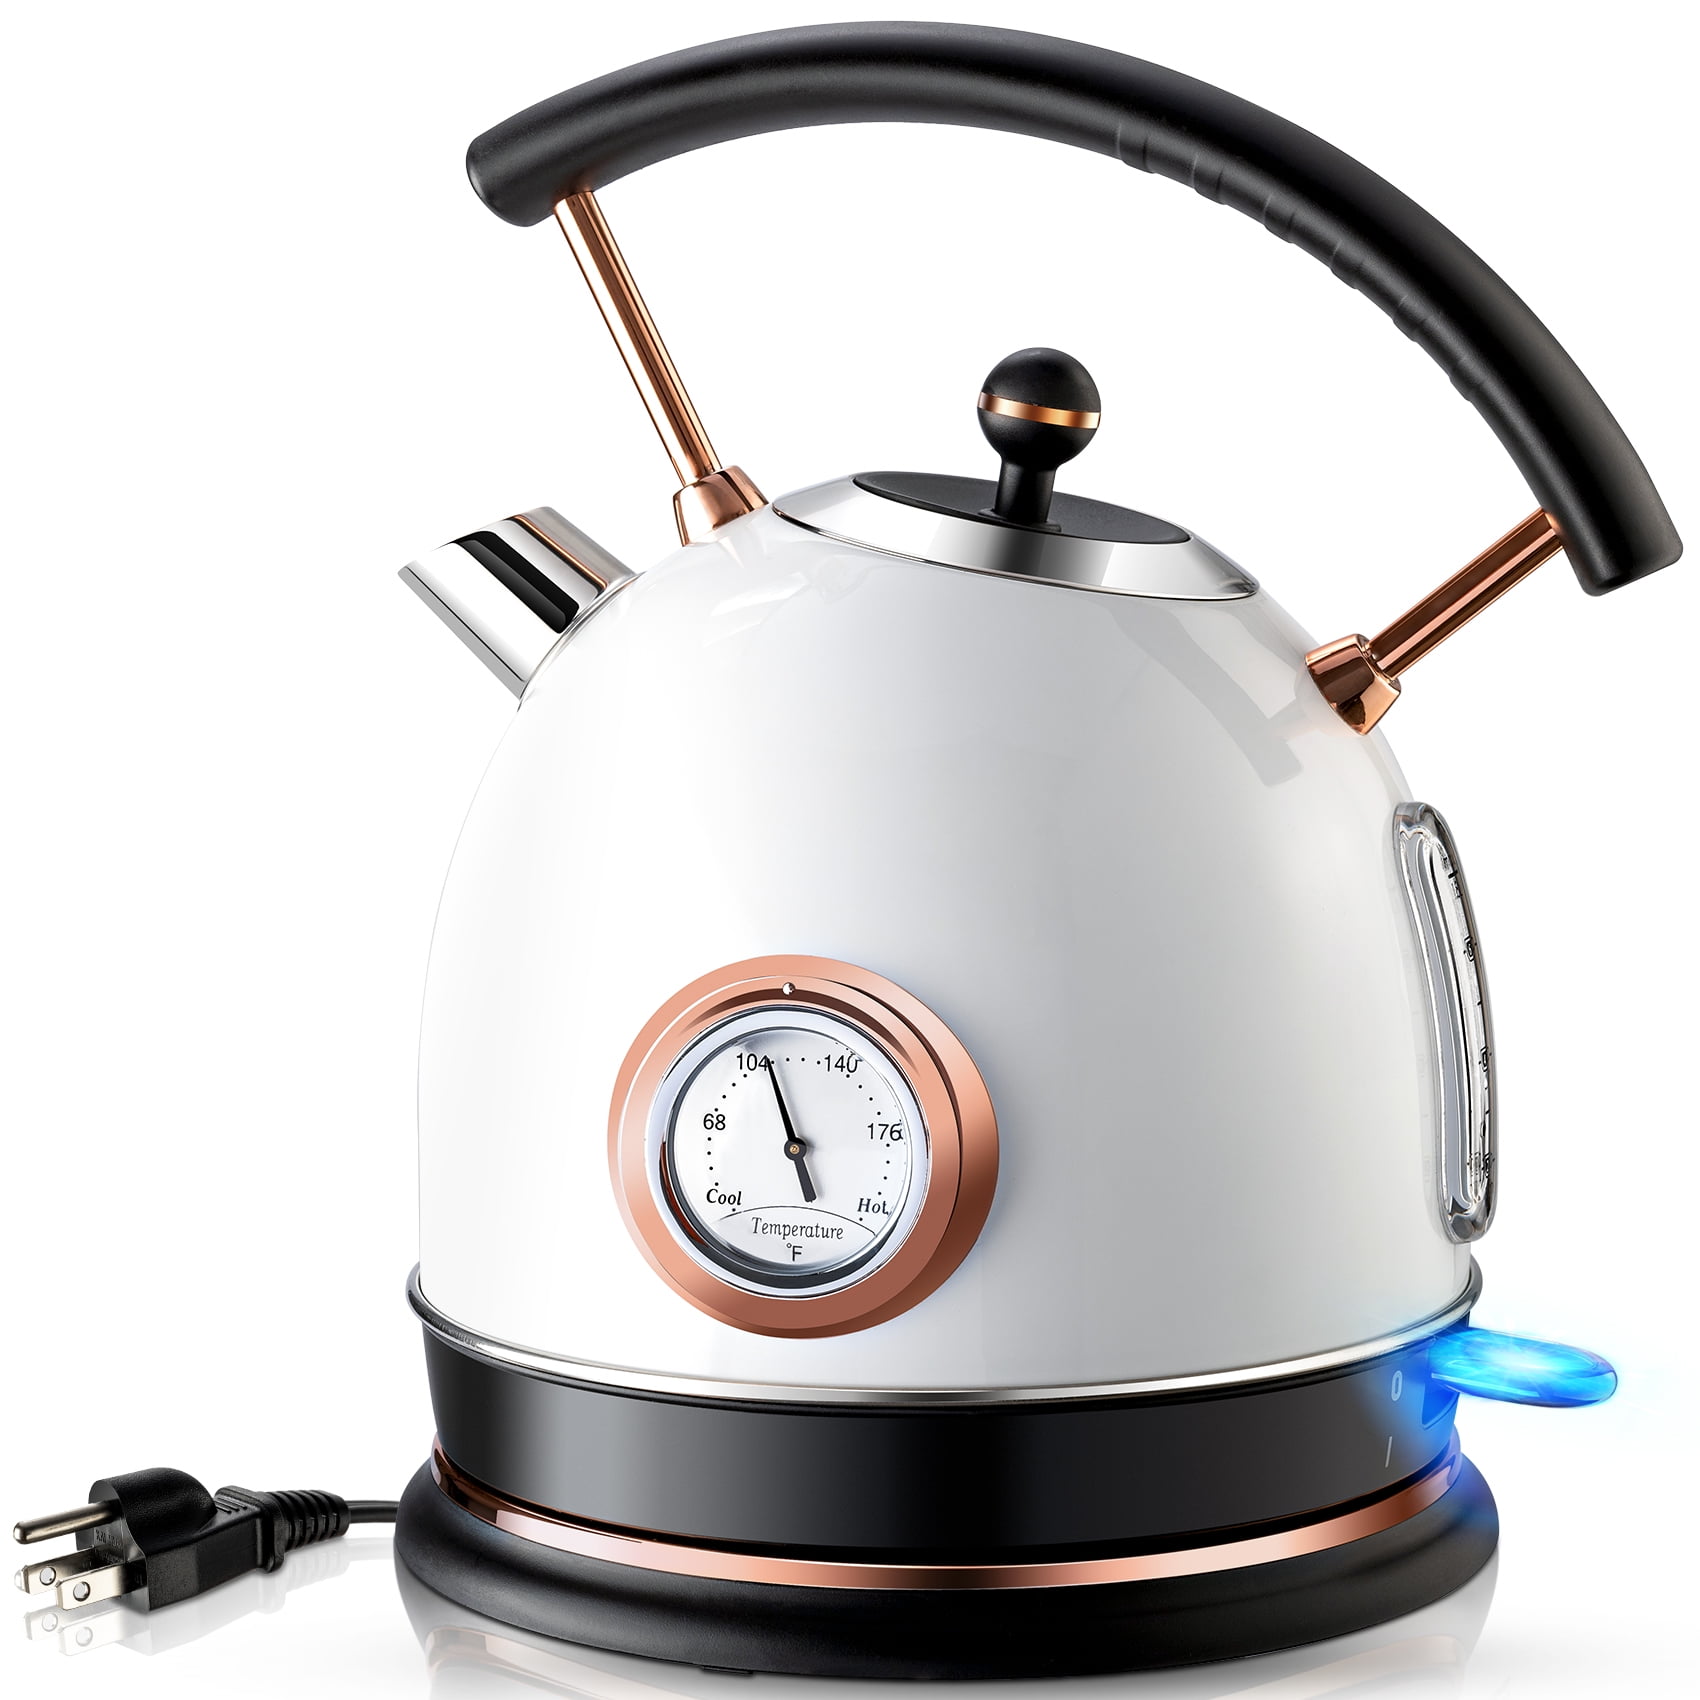 Pukomc Electric Kettle Temperature Control with 4 Presets, Keep Warm 1.7L Electric Tea Kettle & Hot Water Boiler, Auto-Off & Boil-Dry Protection, BPA